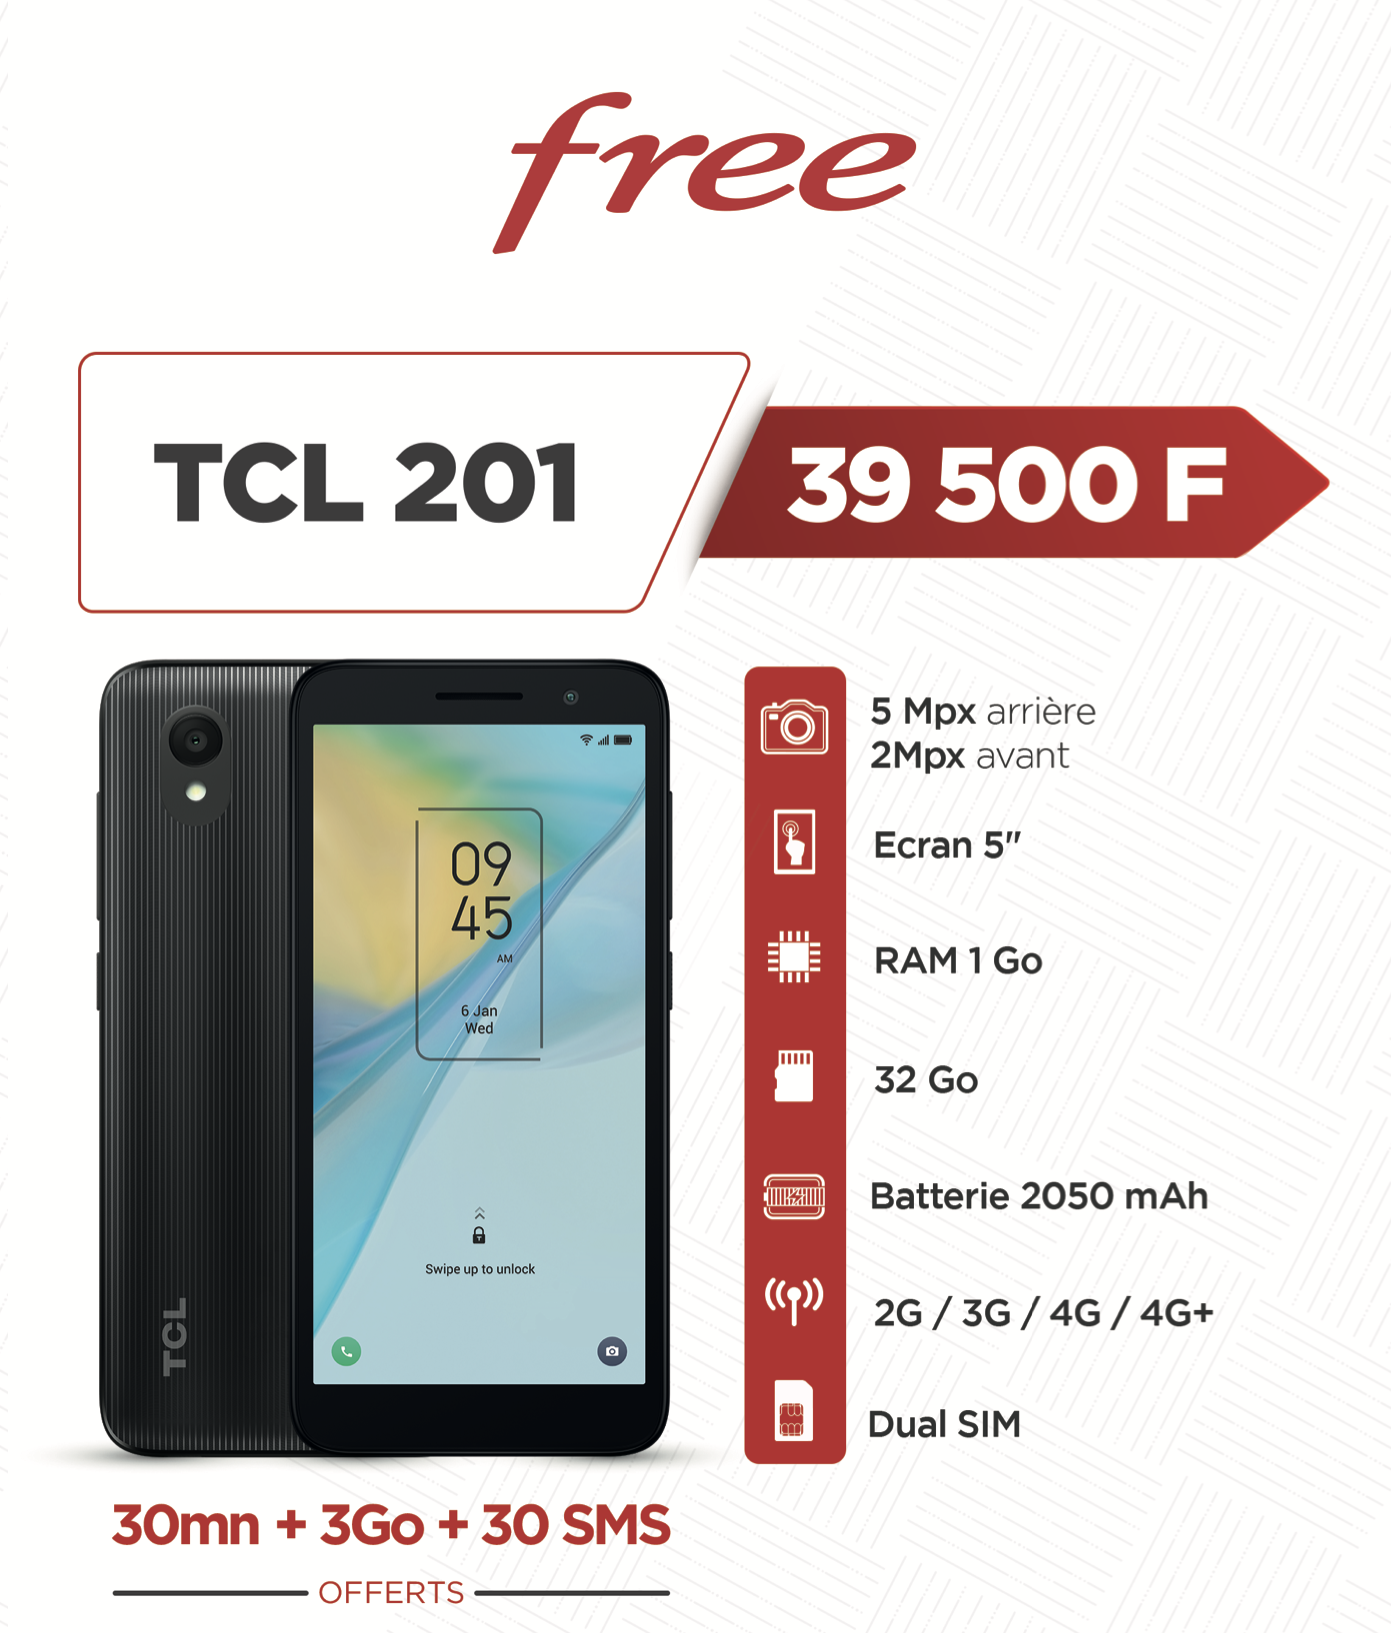 TCL 201